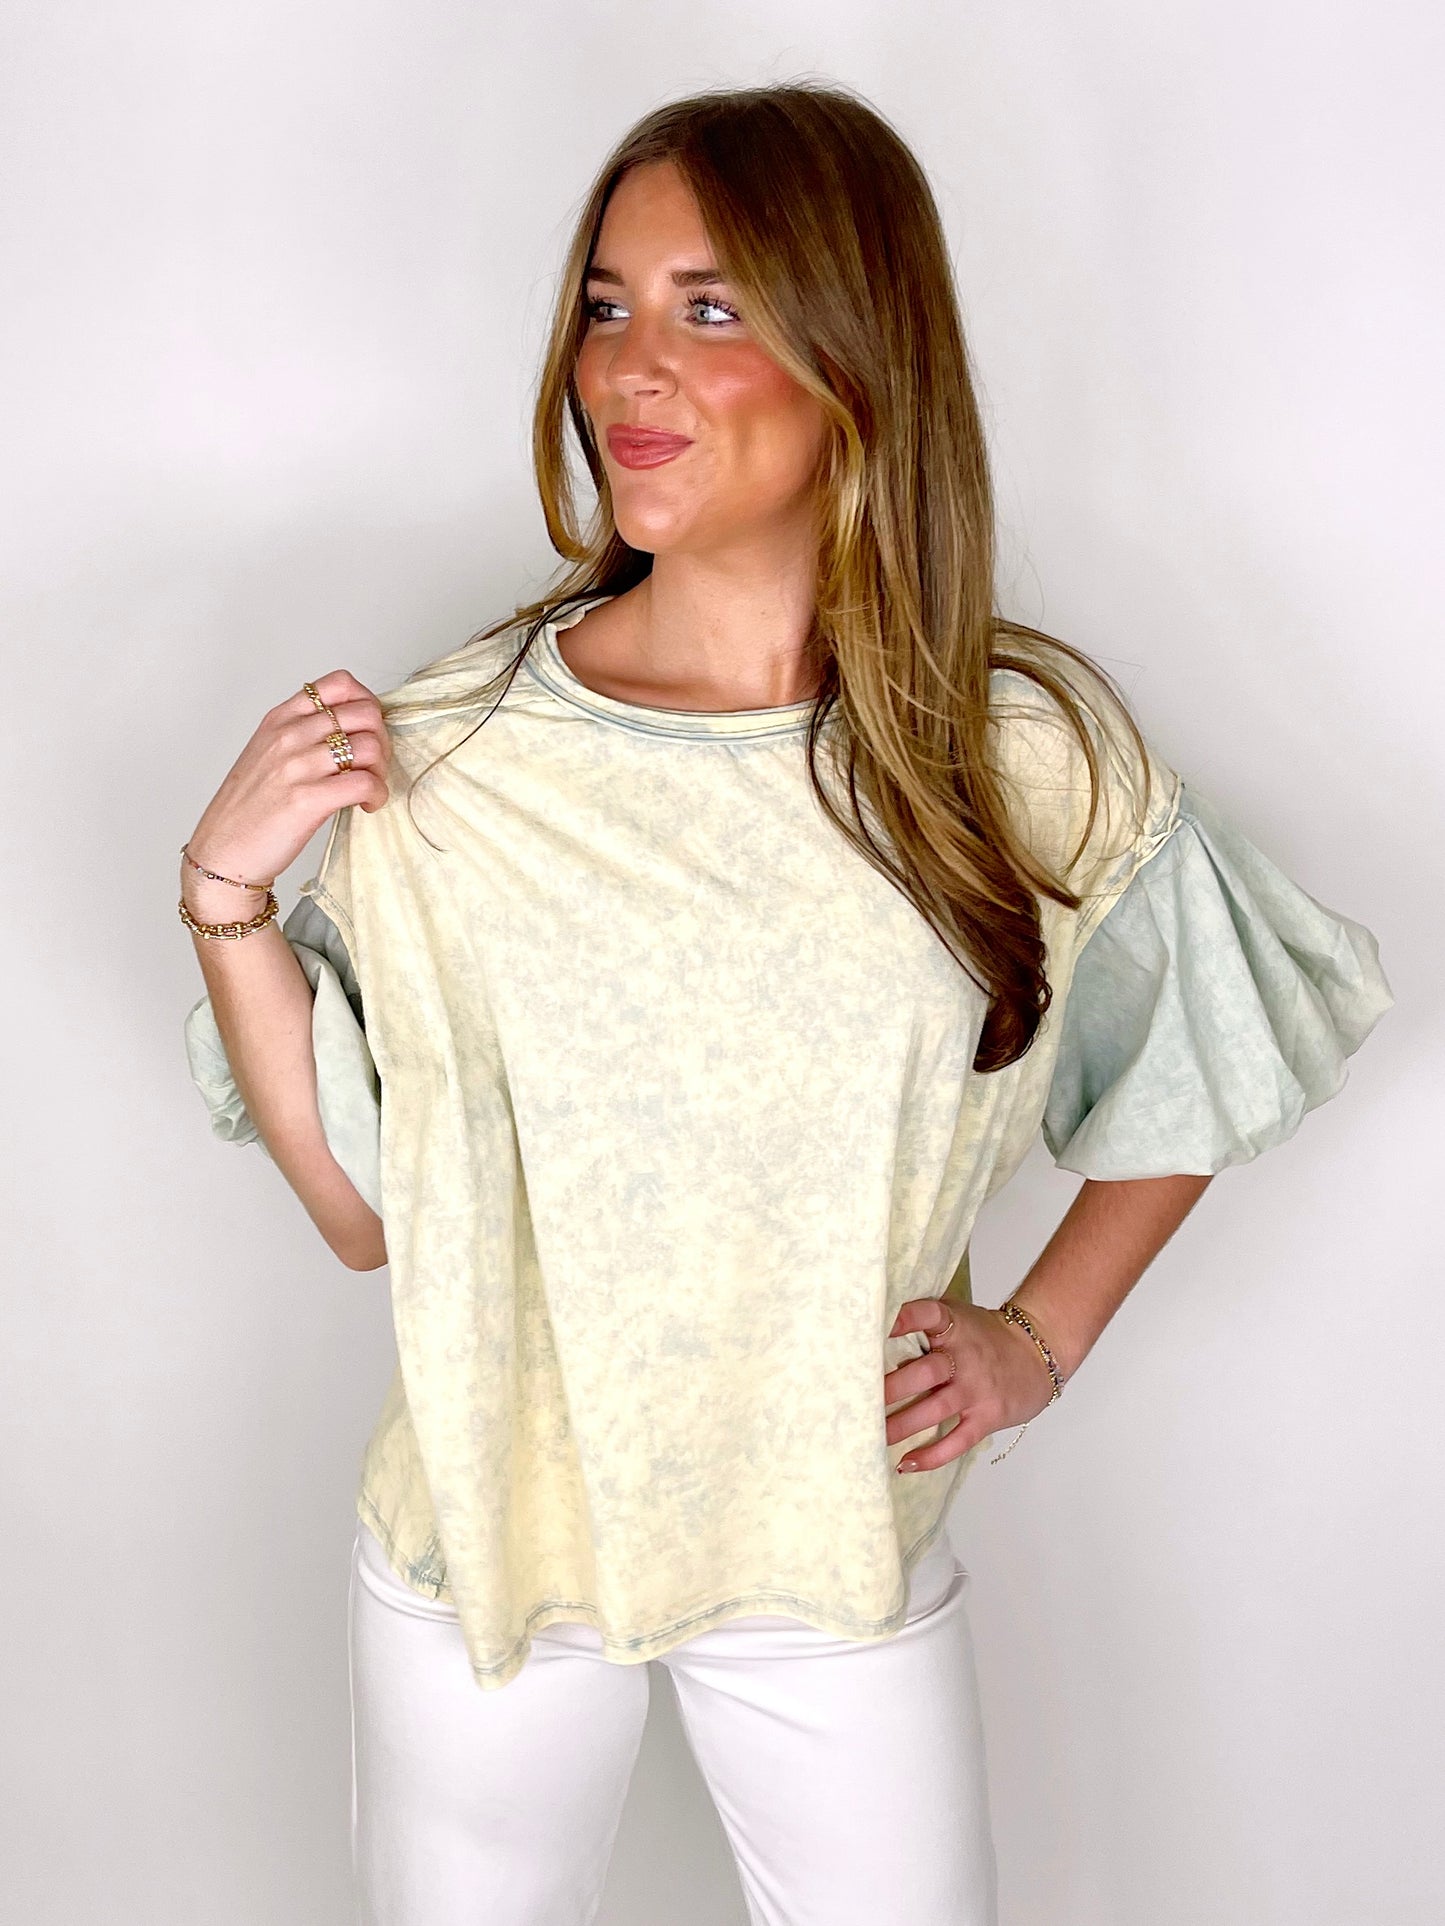 The Mae Top-Short Sleeves-ee:some-The Village Shoppe, Women’s Fashion Boutique, Shop Online and In Store - Located in Muscle Shoals, AL.